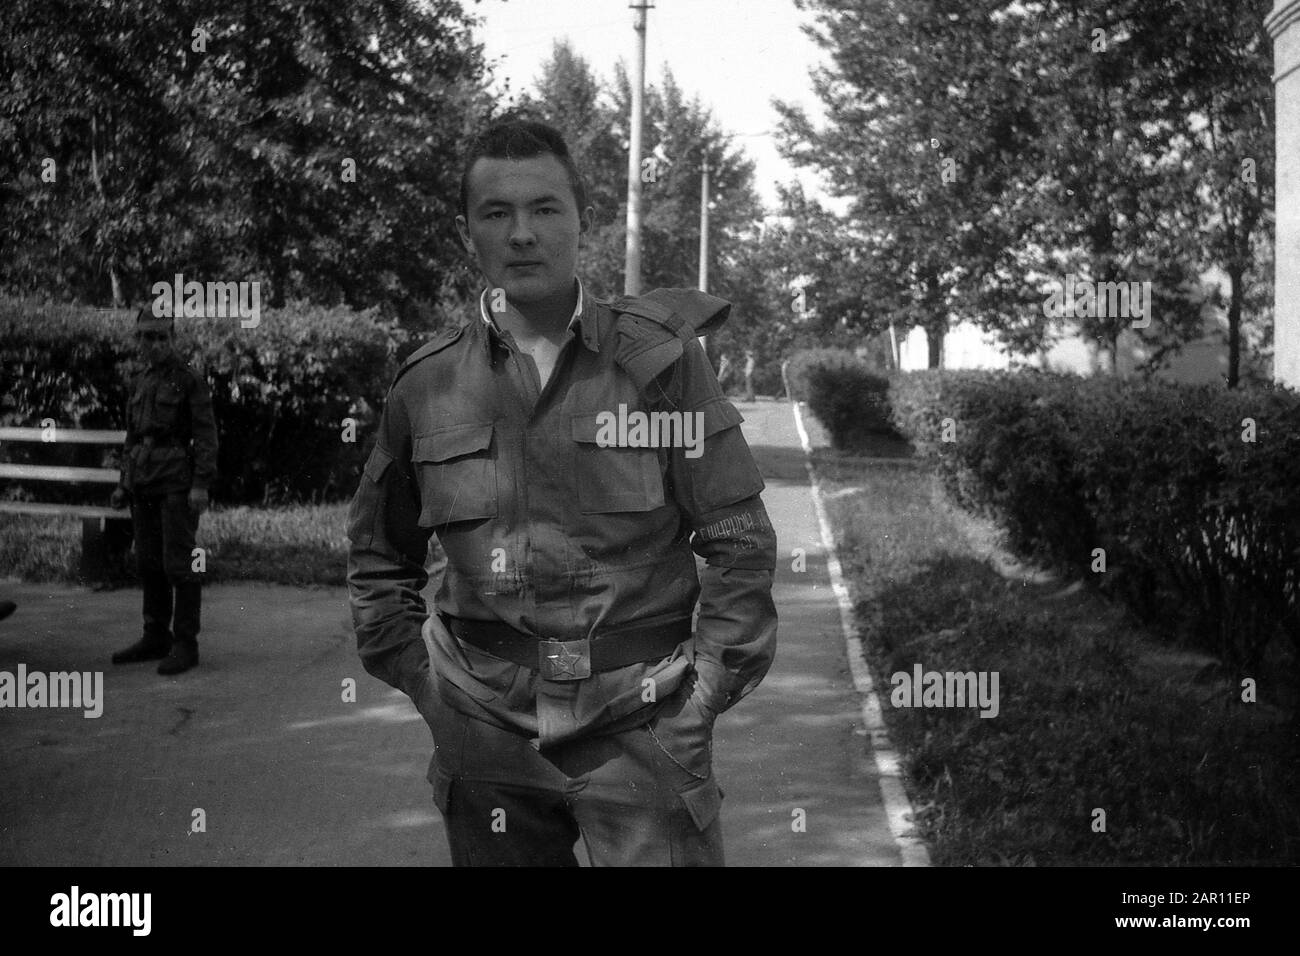 STUPINO, MOSCOW REGION, RUSSIA - CIRCA 1992: The portrait of soldier of the Russian army. Black and white. Film scan. Large grain. Stock Photo